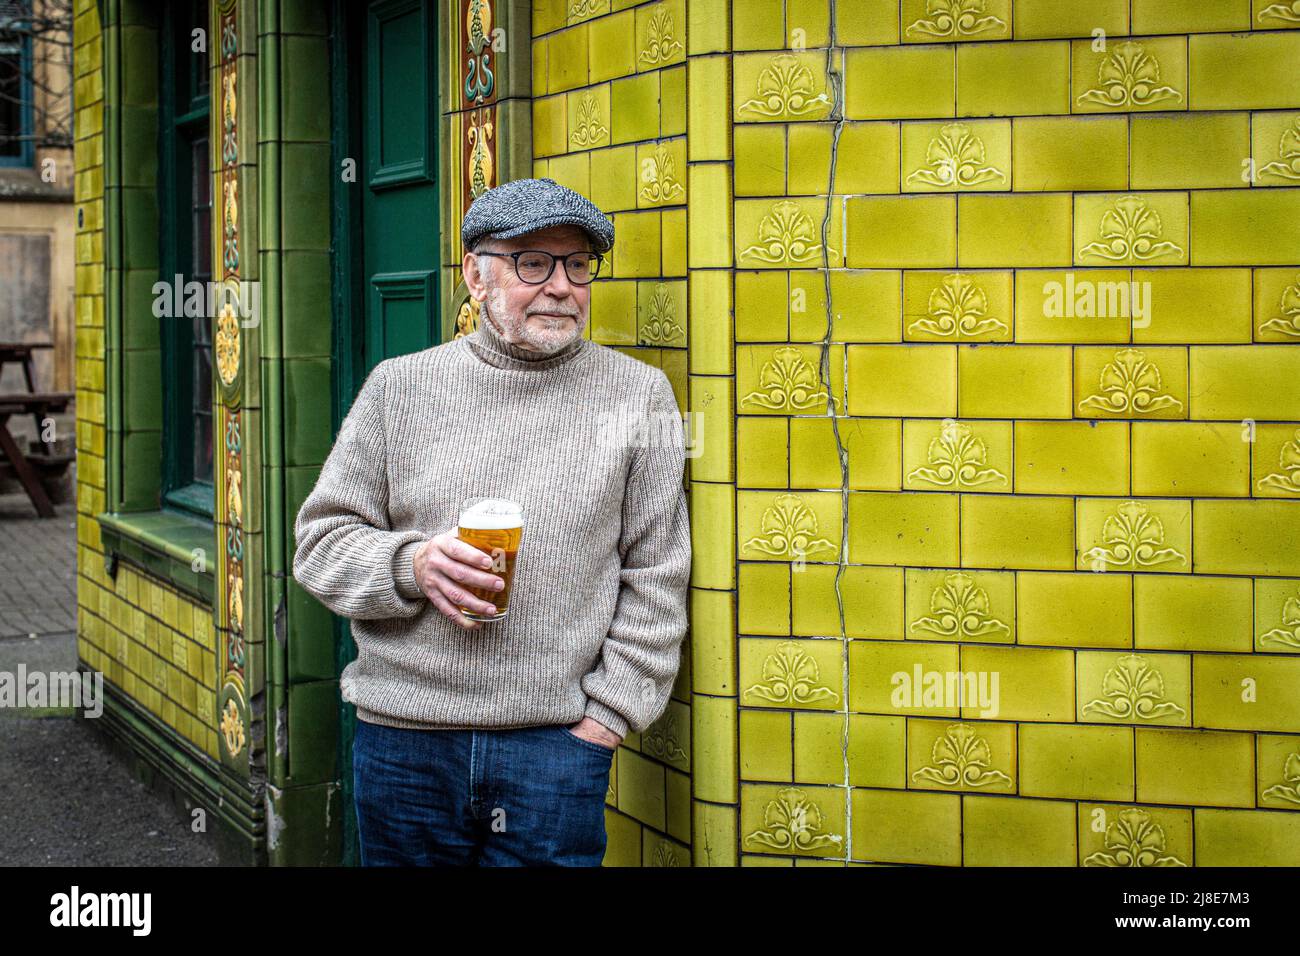 Male stand outside a pub enjoying a drink at The Peveril of the Peak traditional English city pub, located on Great Bridgewater Street, Manchester, UK Stock Photo